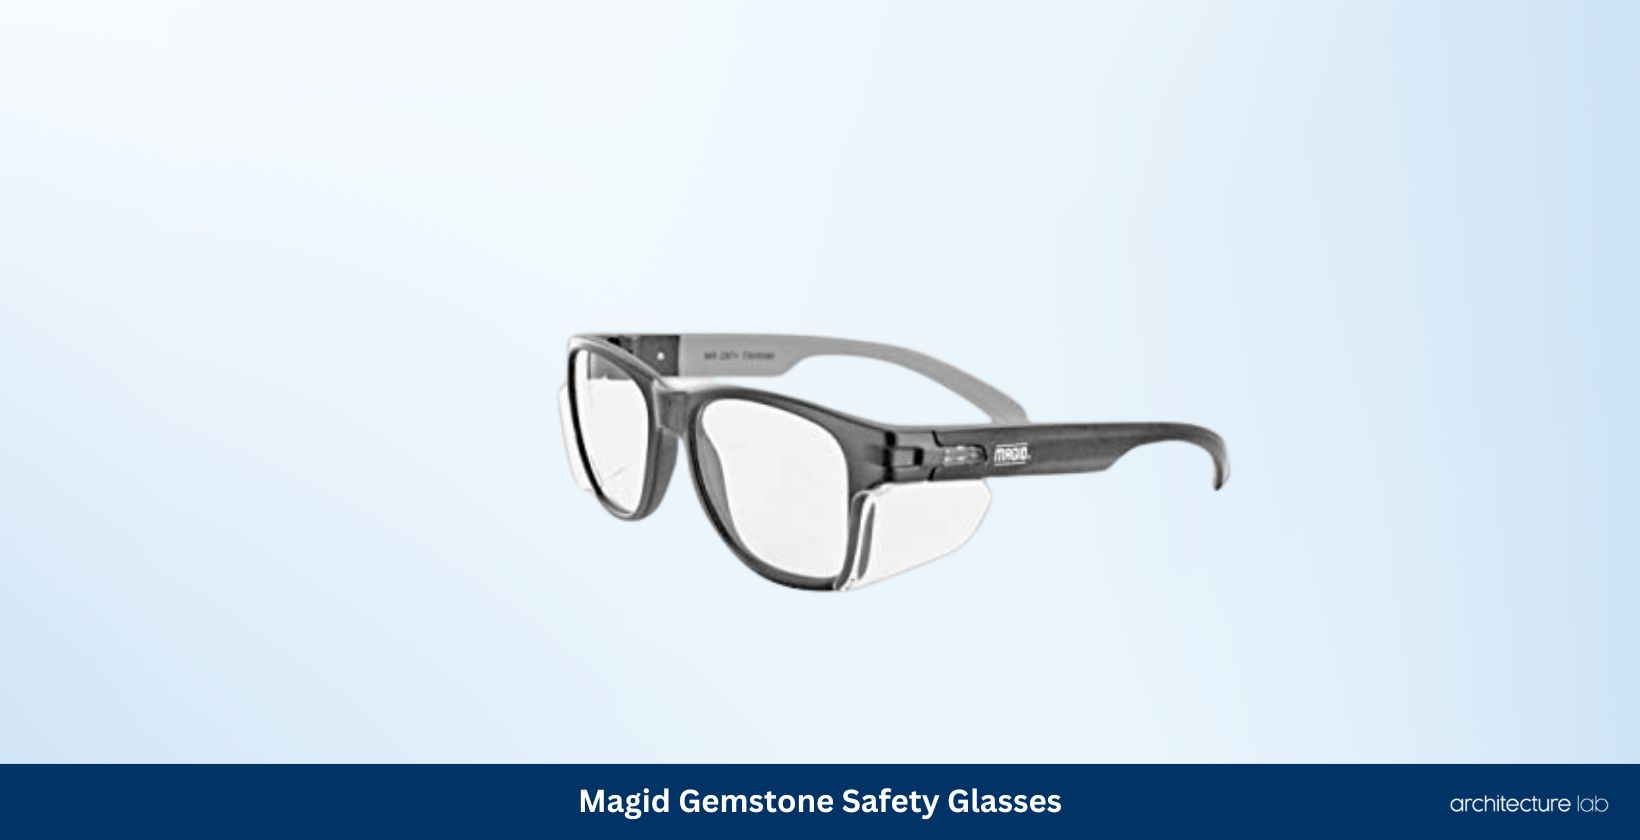 Magid classic black safety glasses with side shields